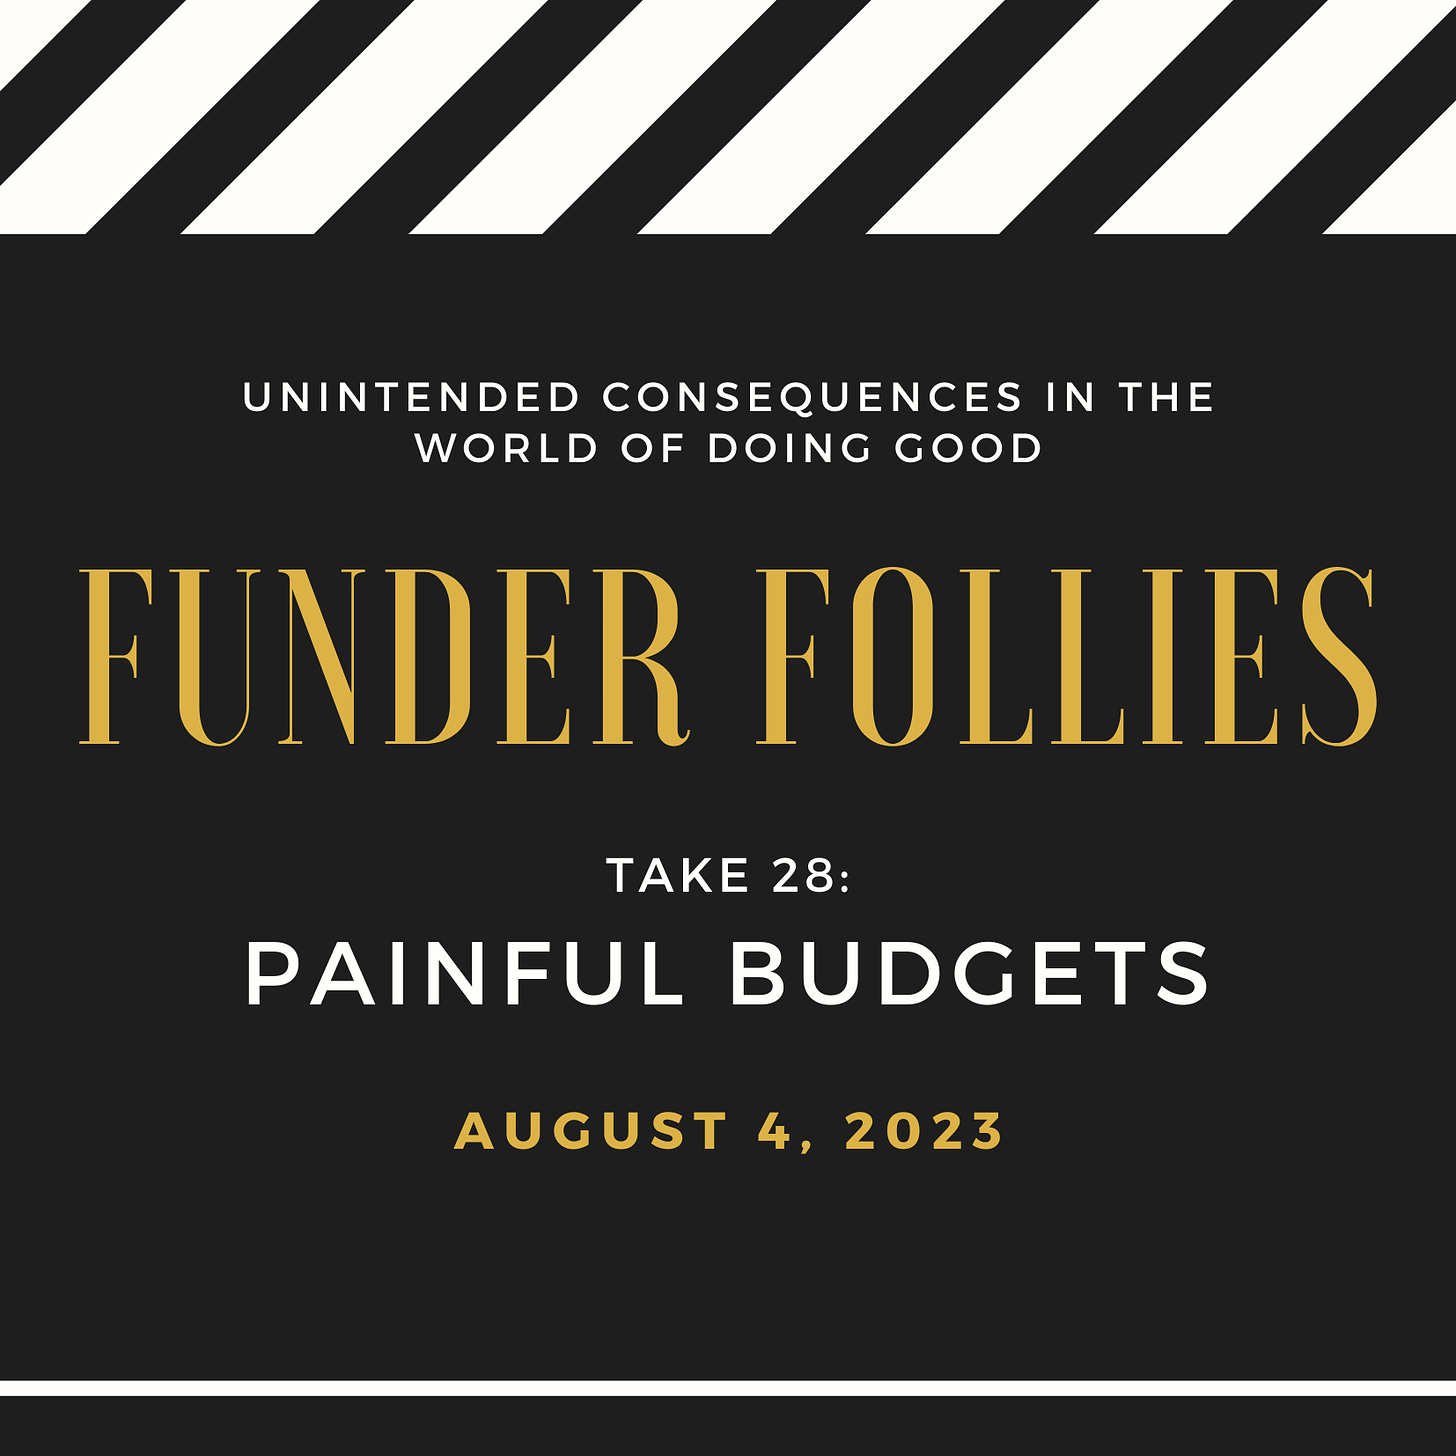 black and white movie clapper board with Funder Follies, Take 28, Painful Budgets, August 4, 2023